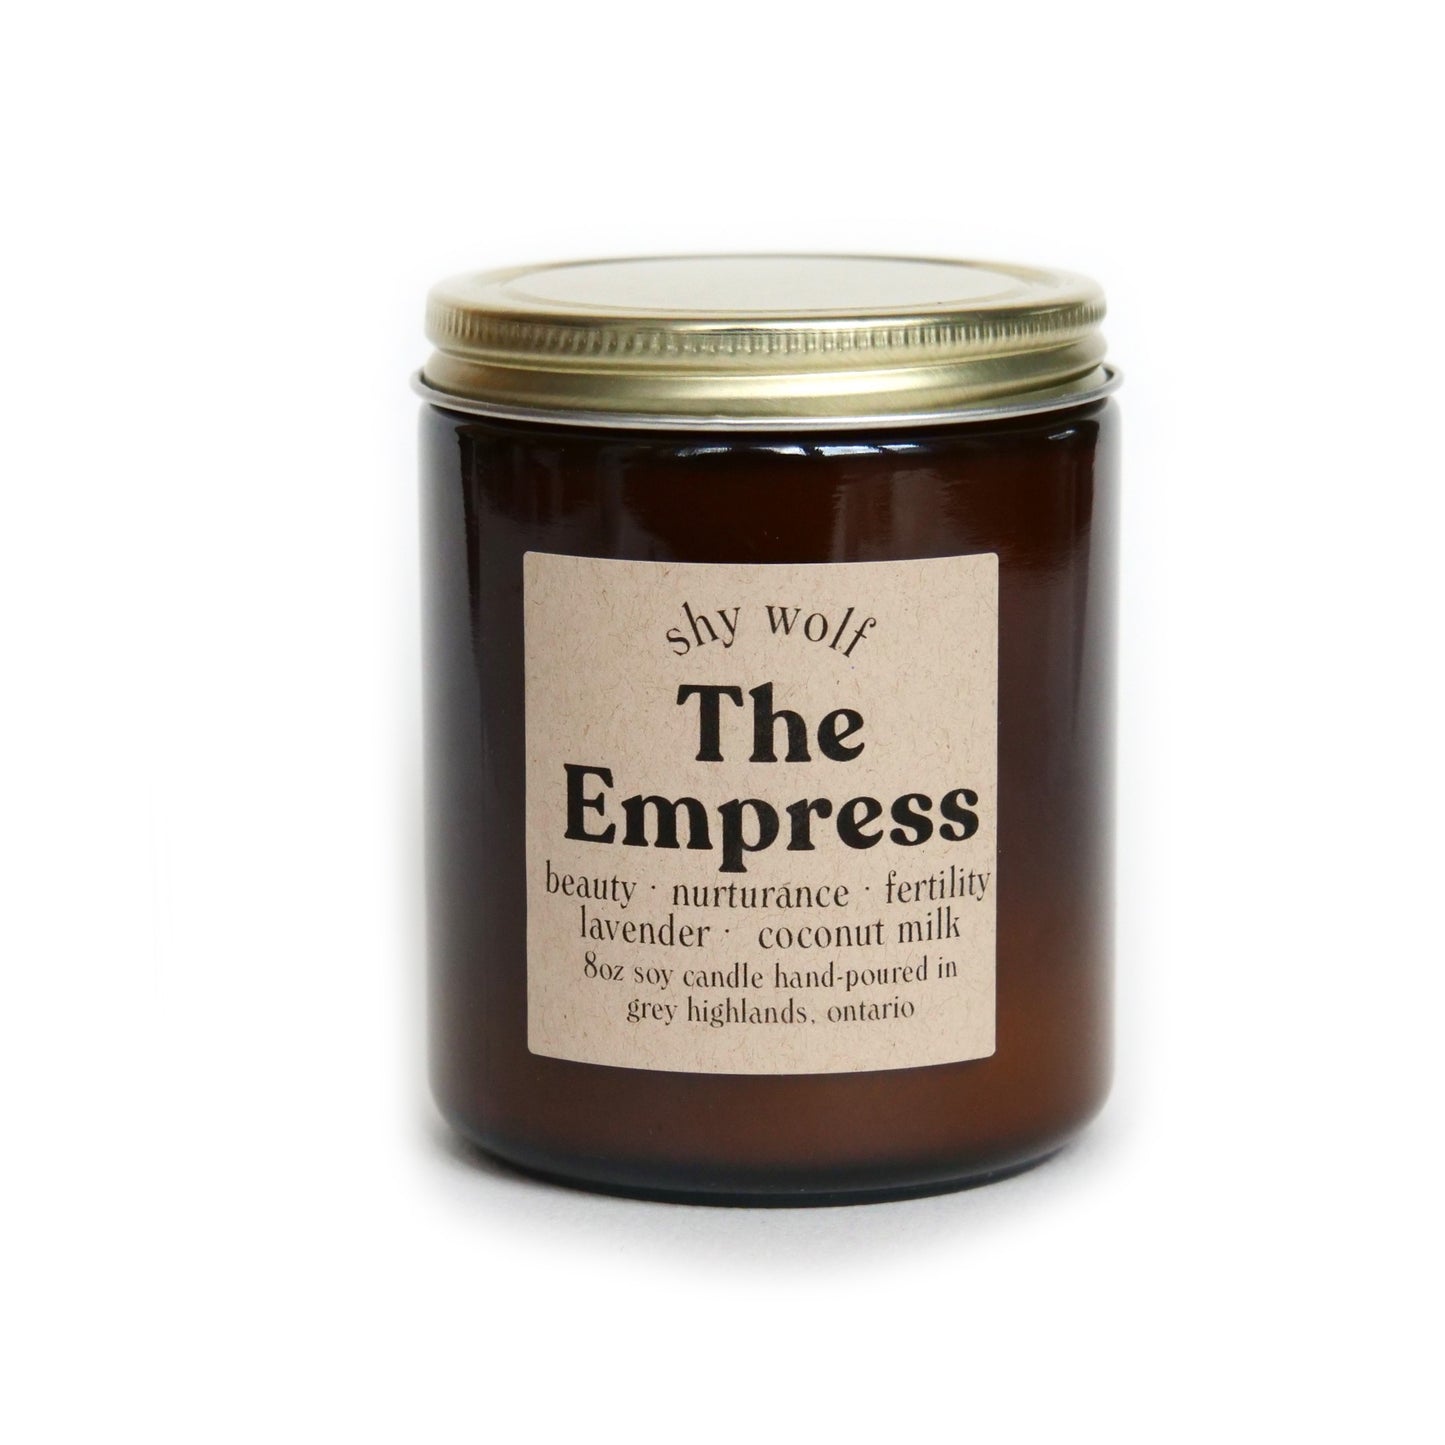 All natural hand-poured "The Empress" scented soy candle made in Canada by Shy Wolf candles.